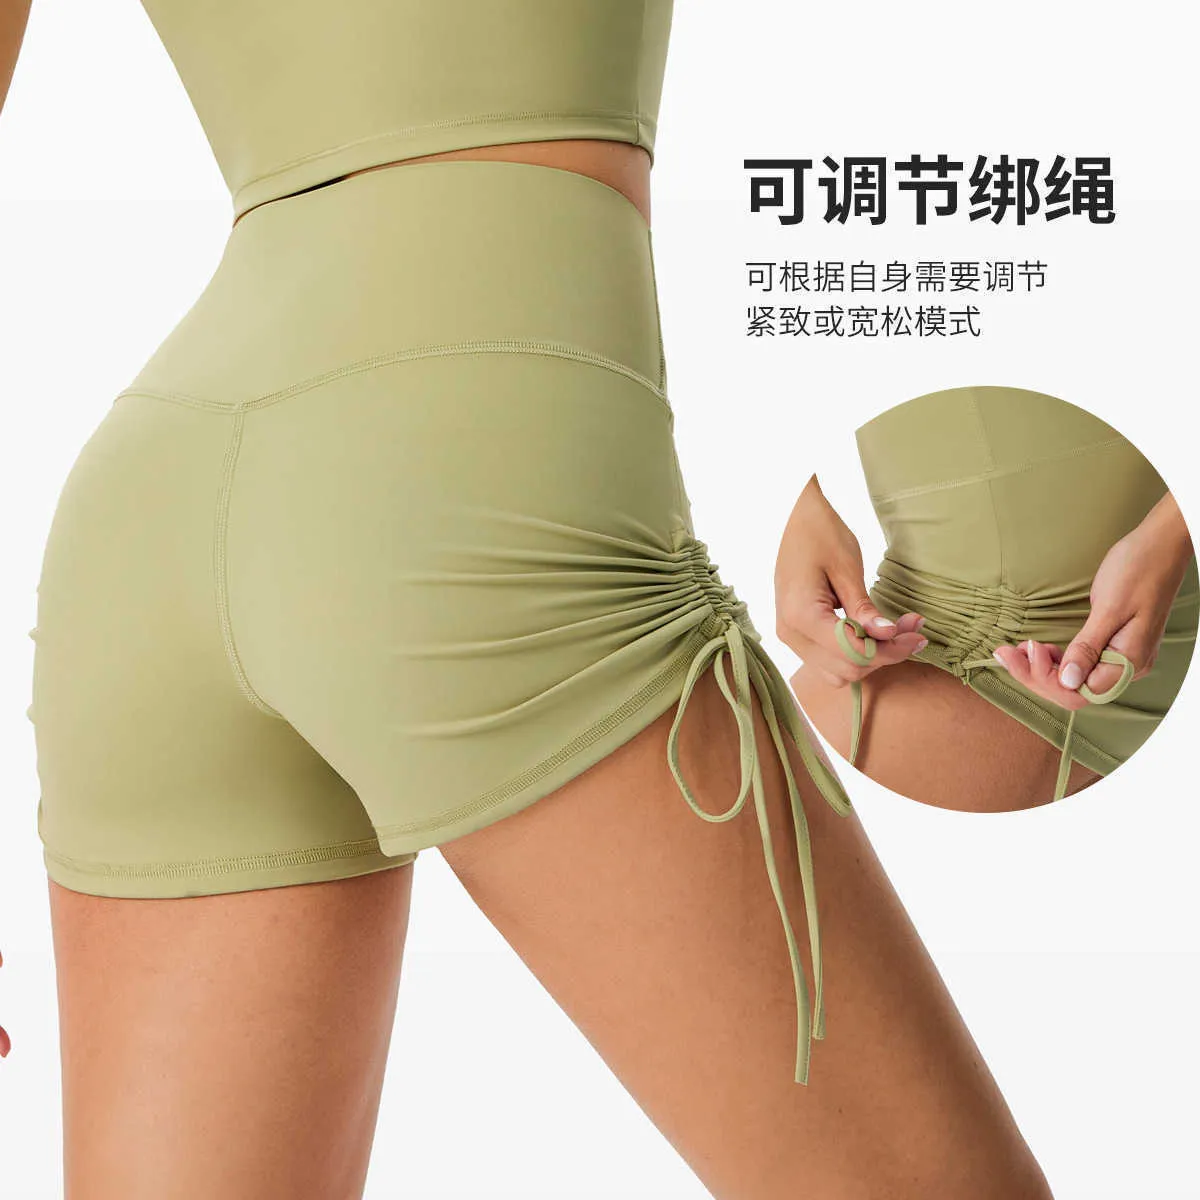 Sport Drawstring Peach Yoga Outfits Shorts Bacteriostase Fitness Running Hot Pants Hoge taille Casual vrouwelijk ondergoed